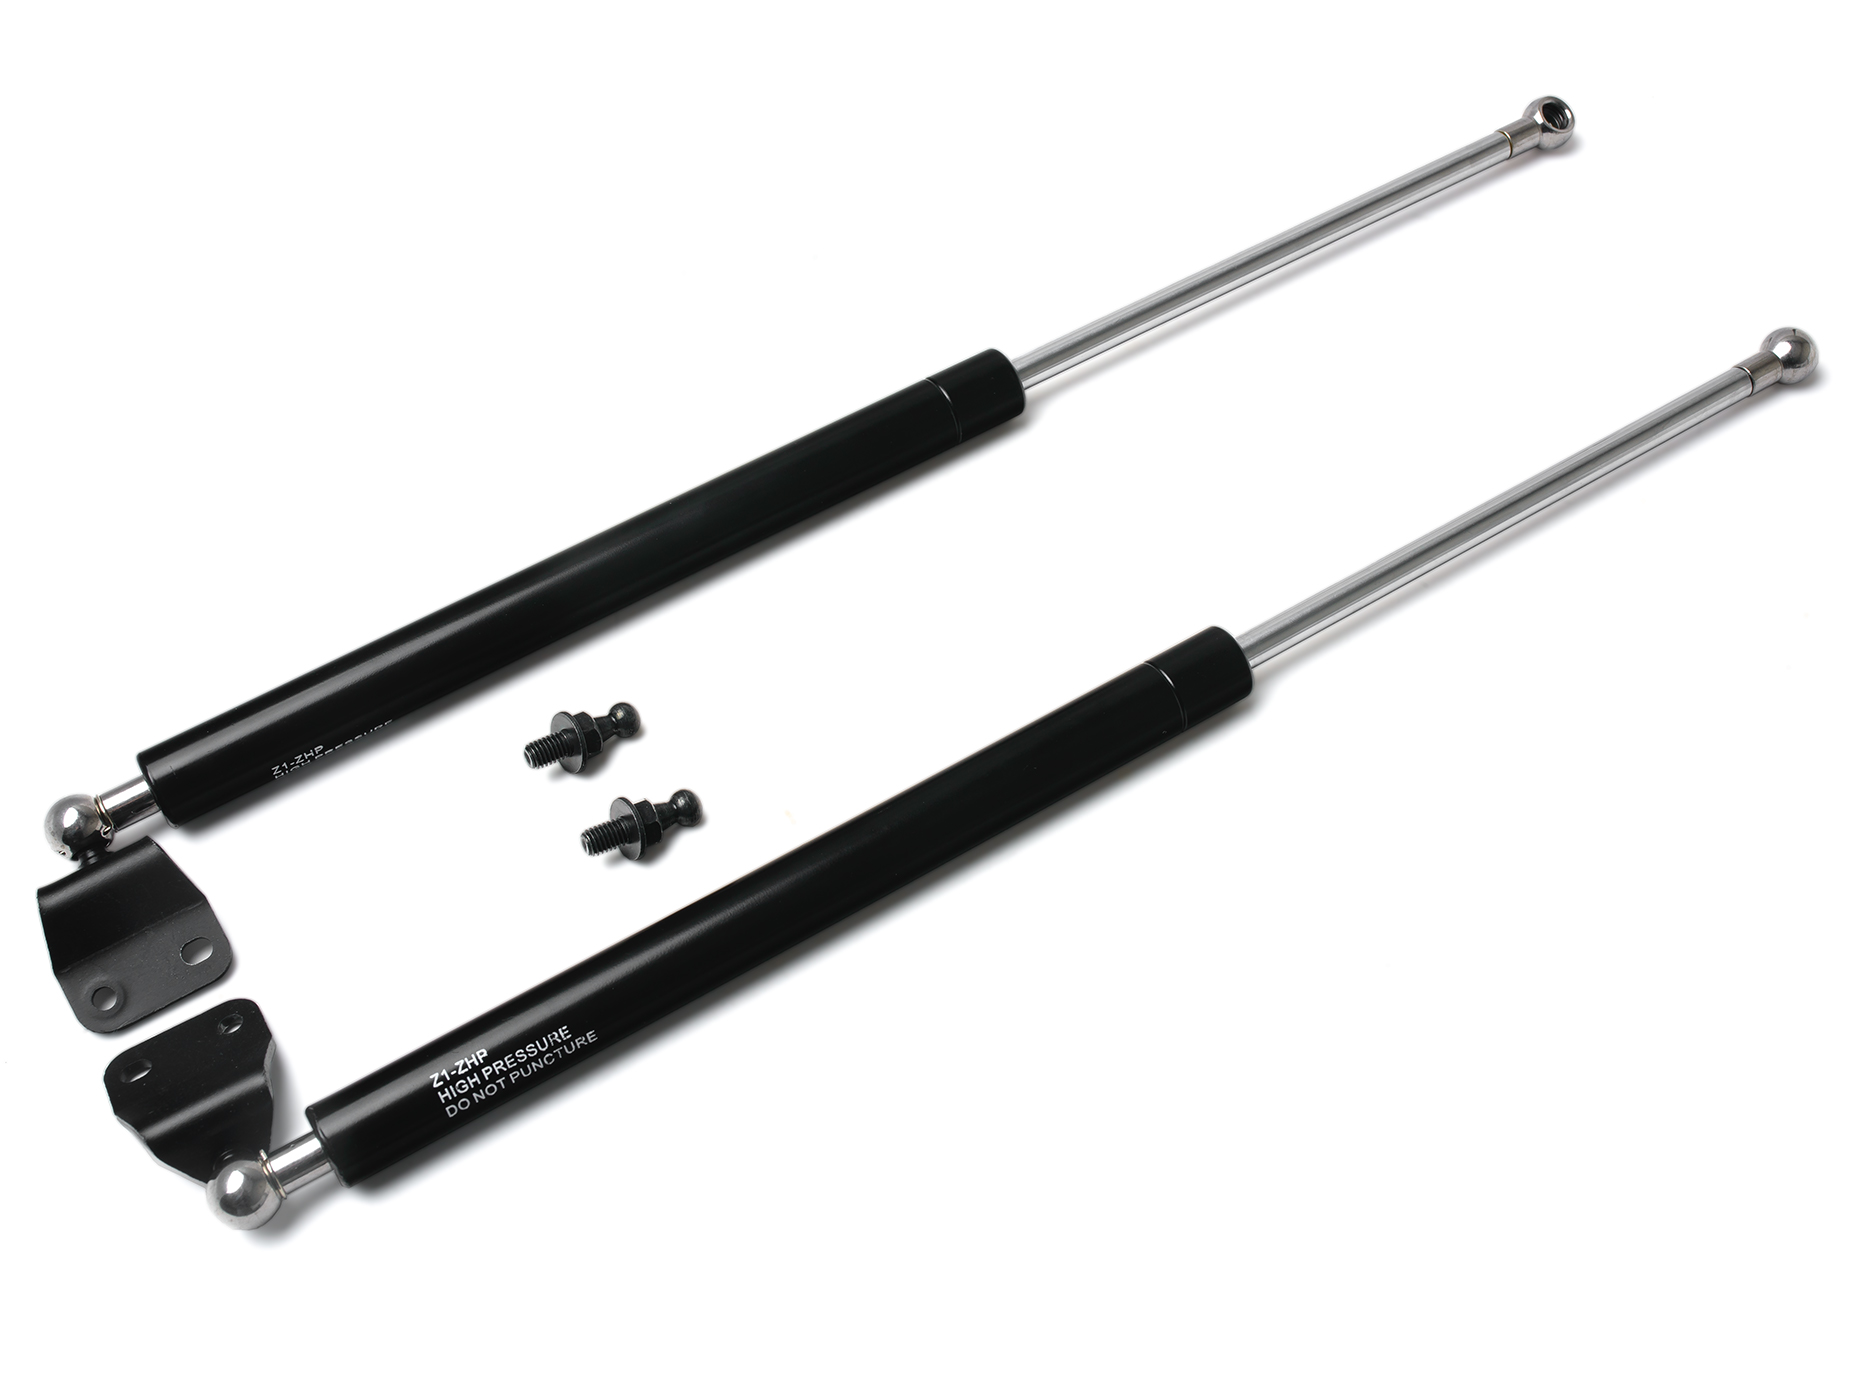 Includes Brackets,Set of 2 Vepagoo Rear Hatch Lift Supports Struts for 2003-2008 Nissan 350z Trunk Gas Shocks with Added Pressure for Larger Spoiler 